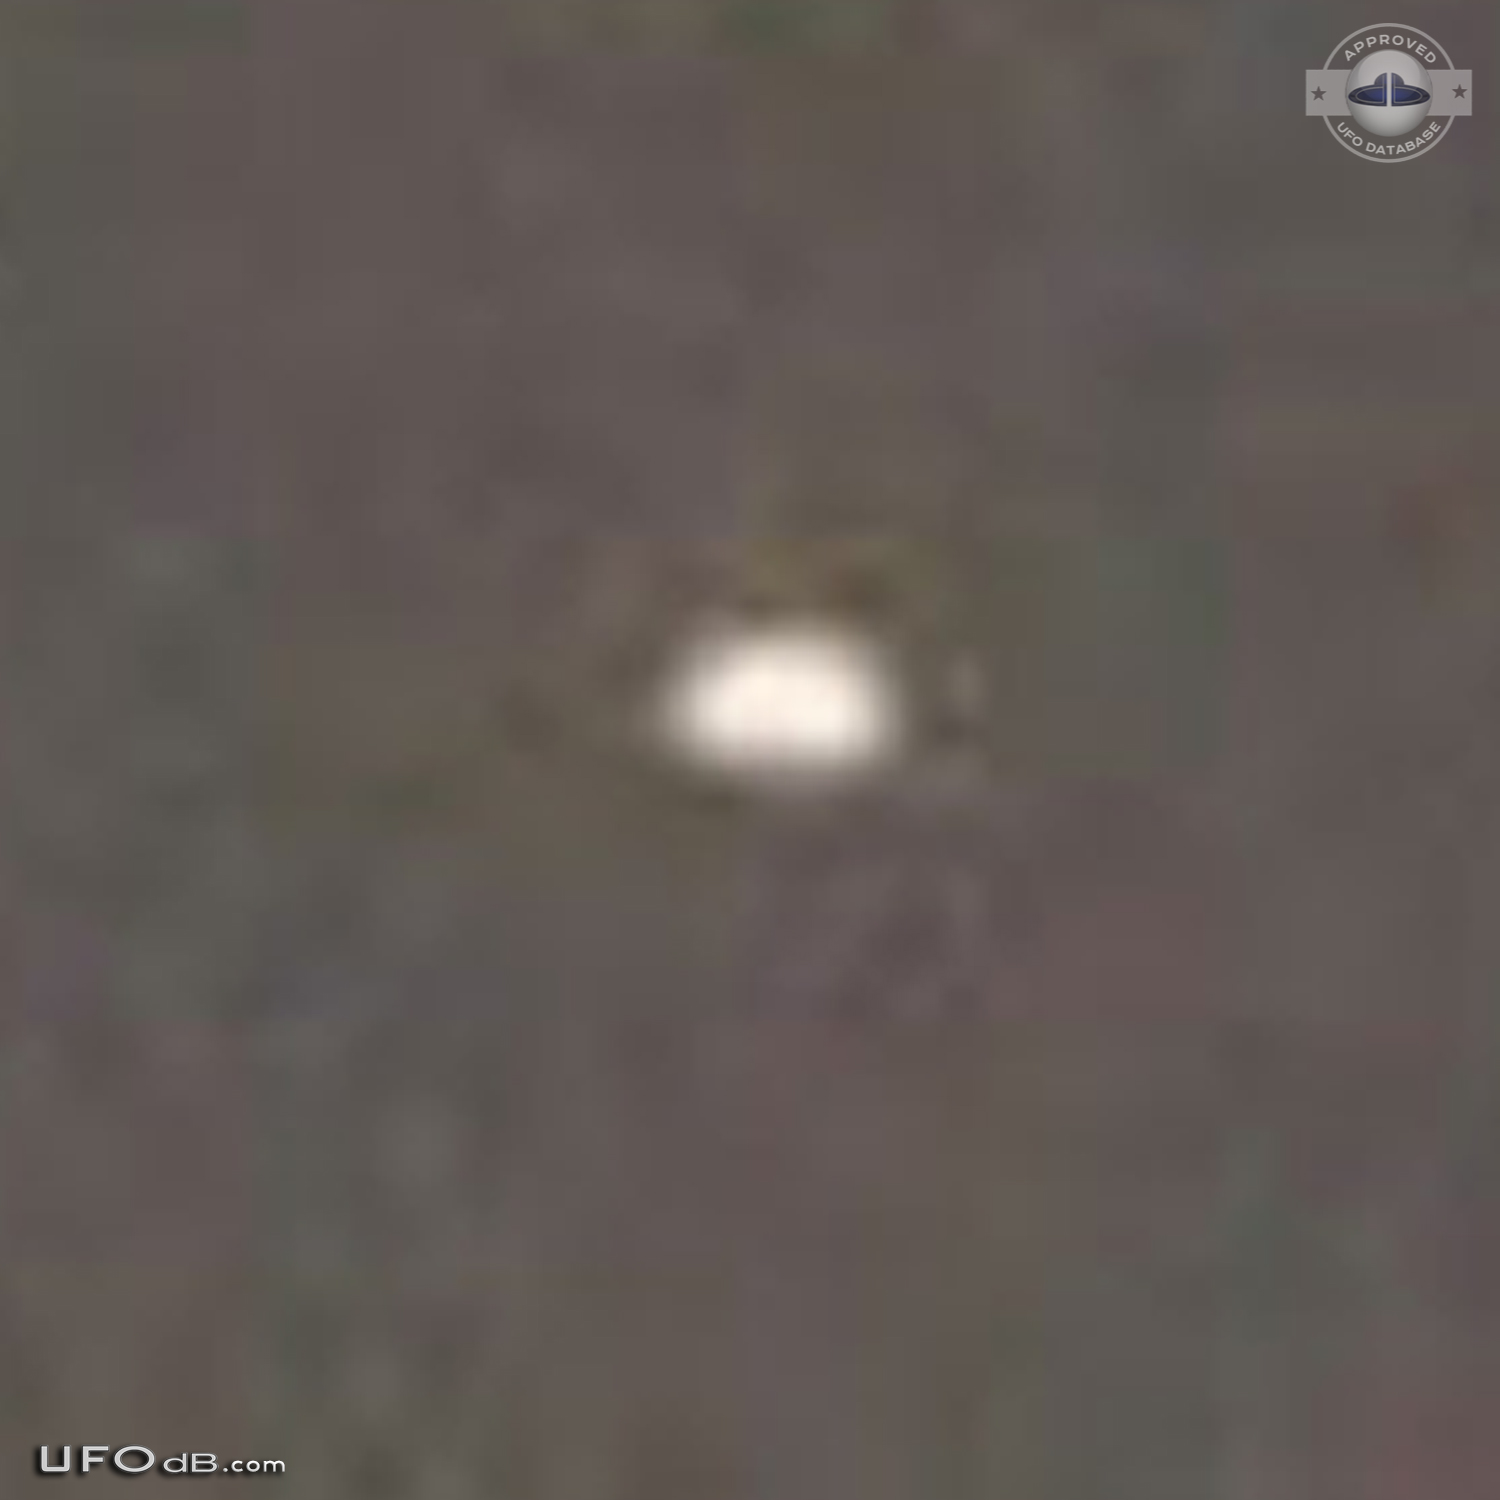 China Newspaper say [The Aliens are coming] after UFO sightings 2010 UFO Picture #469-3